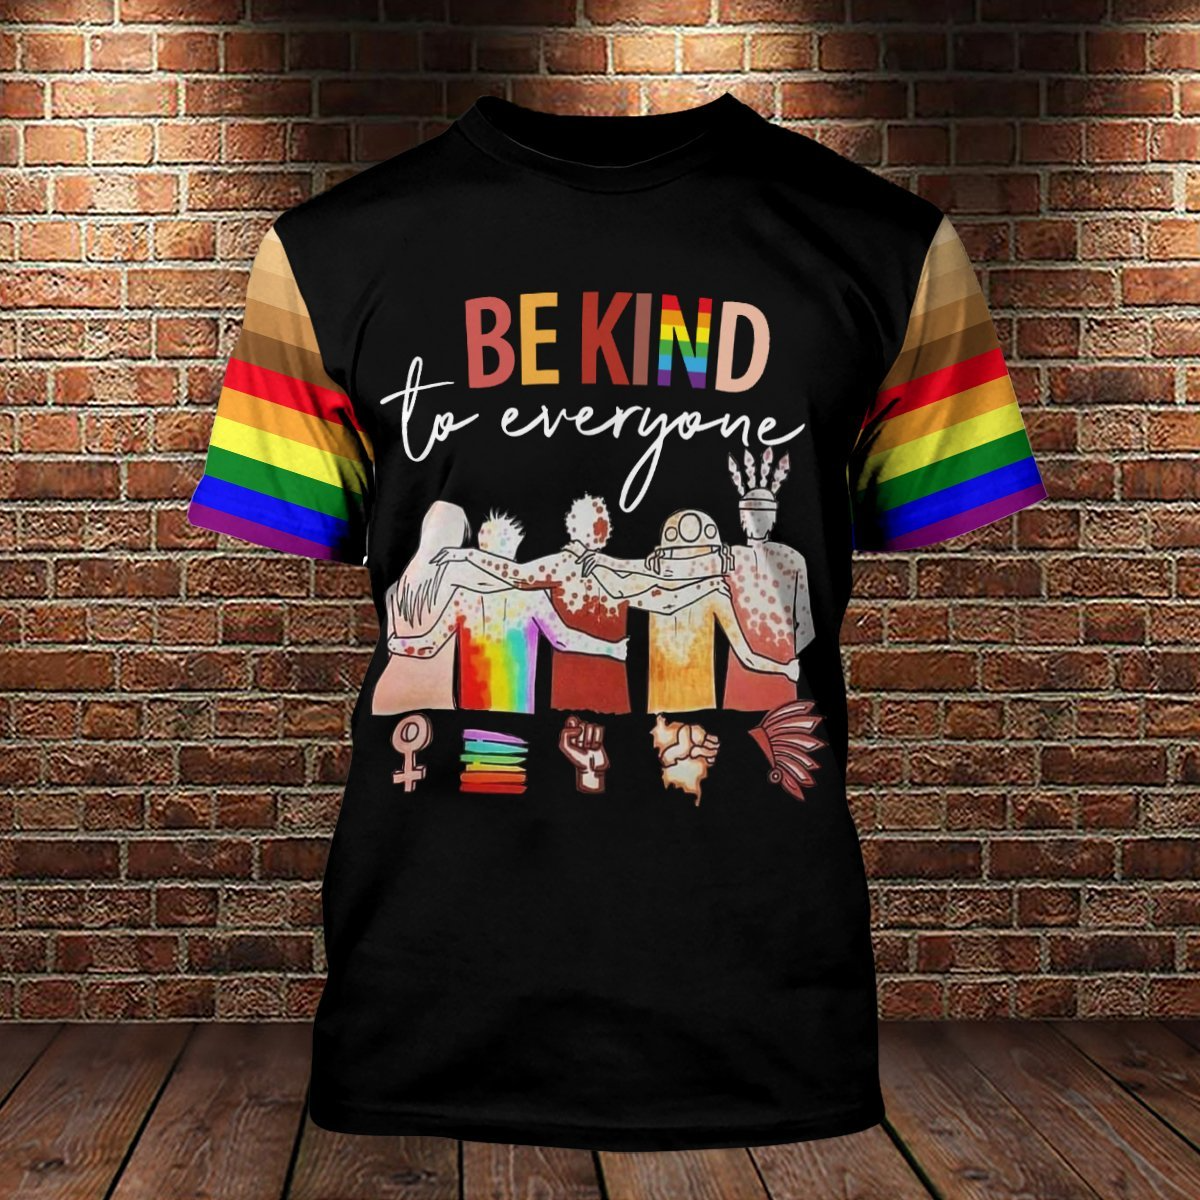 LGBT Be Kind To Everyone 3D All Over Printed Shirts For Pride Month/ Shirts For Pride